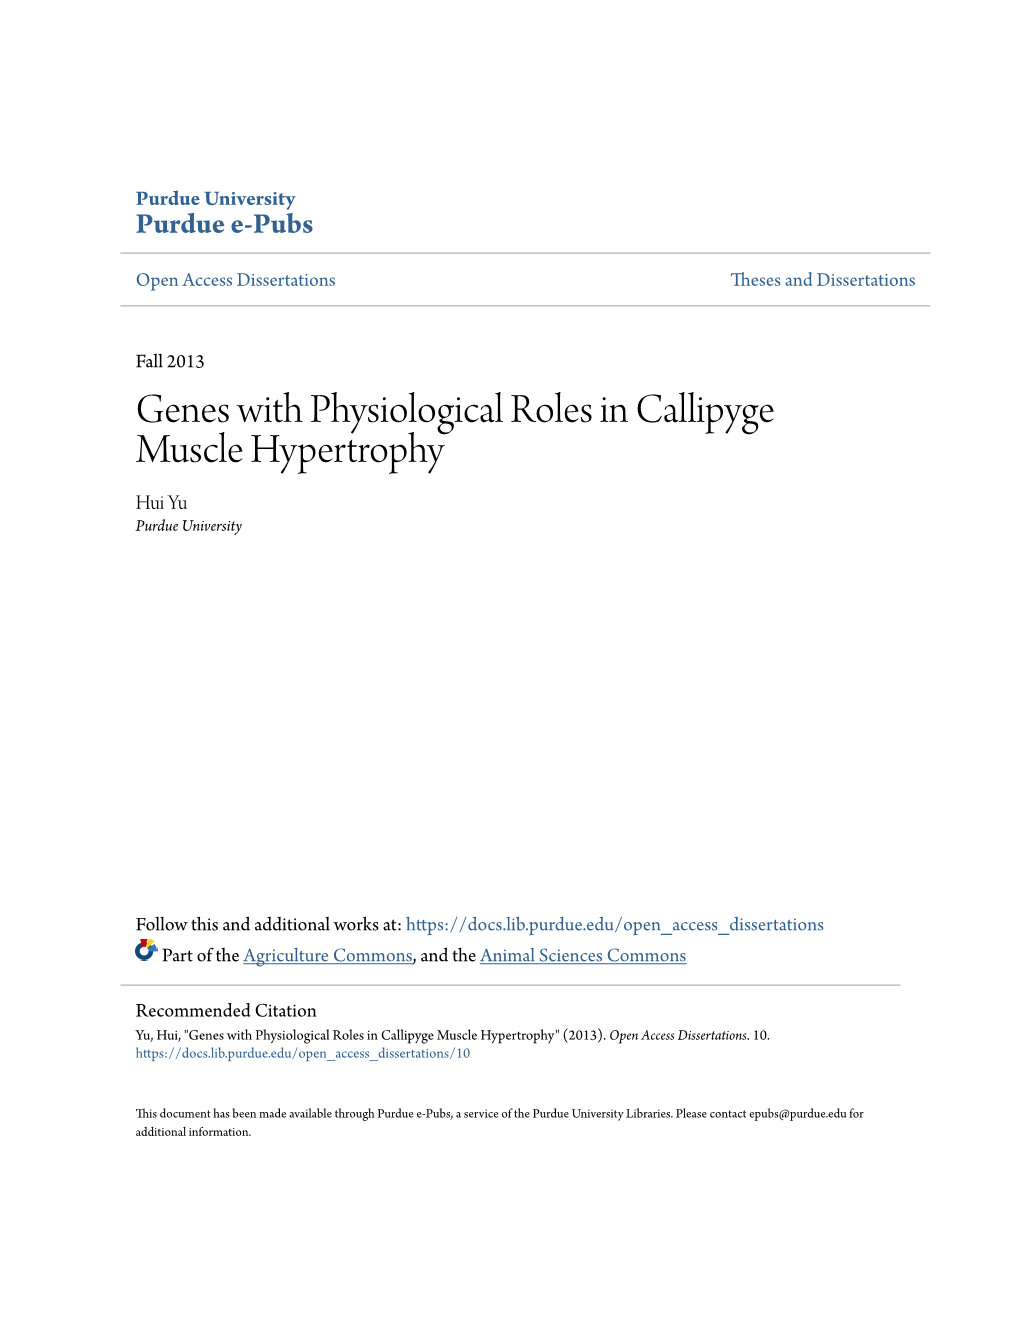 Genes with Physiological Roles in Callipyge Muscle Hypertrophy Hui Yu Purdue University